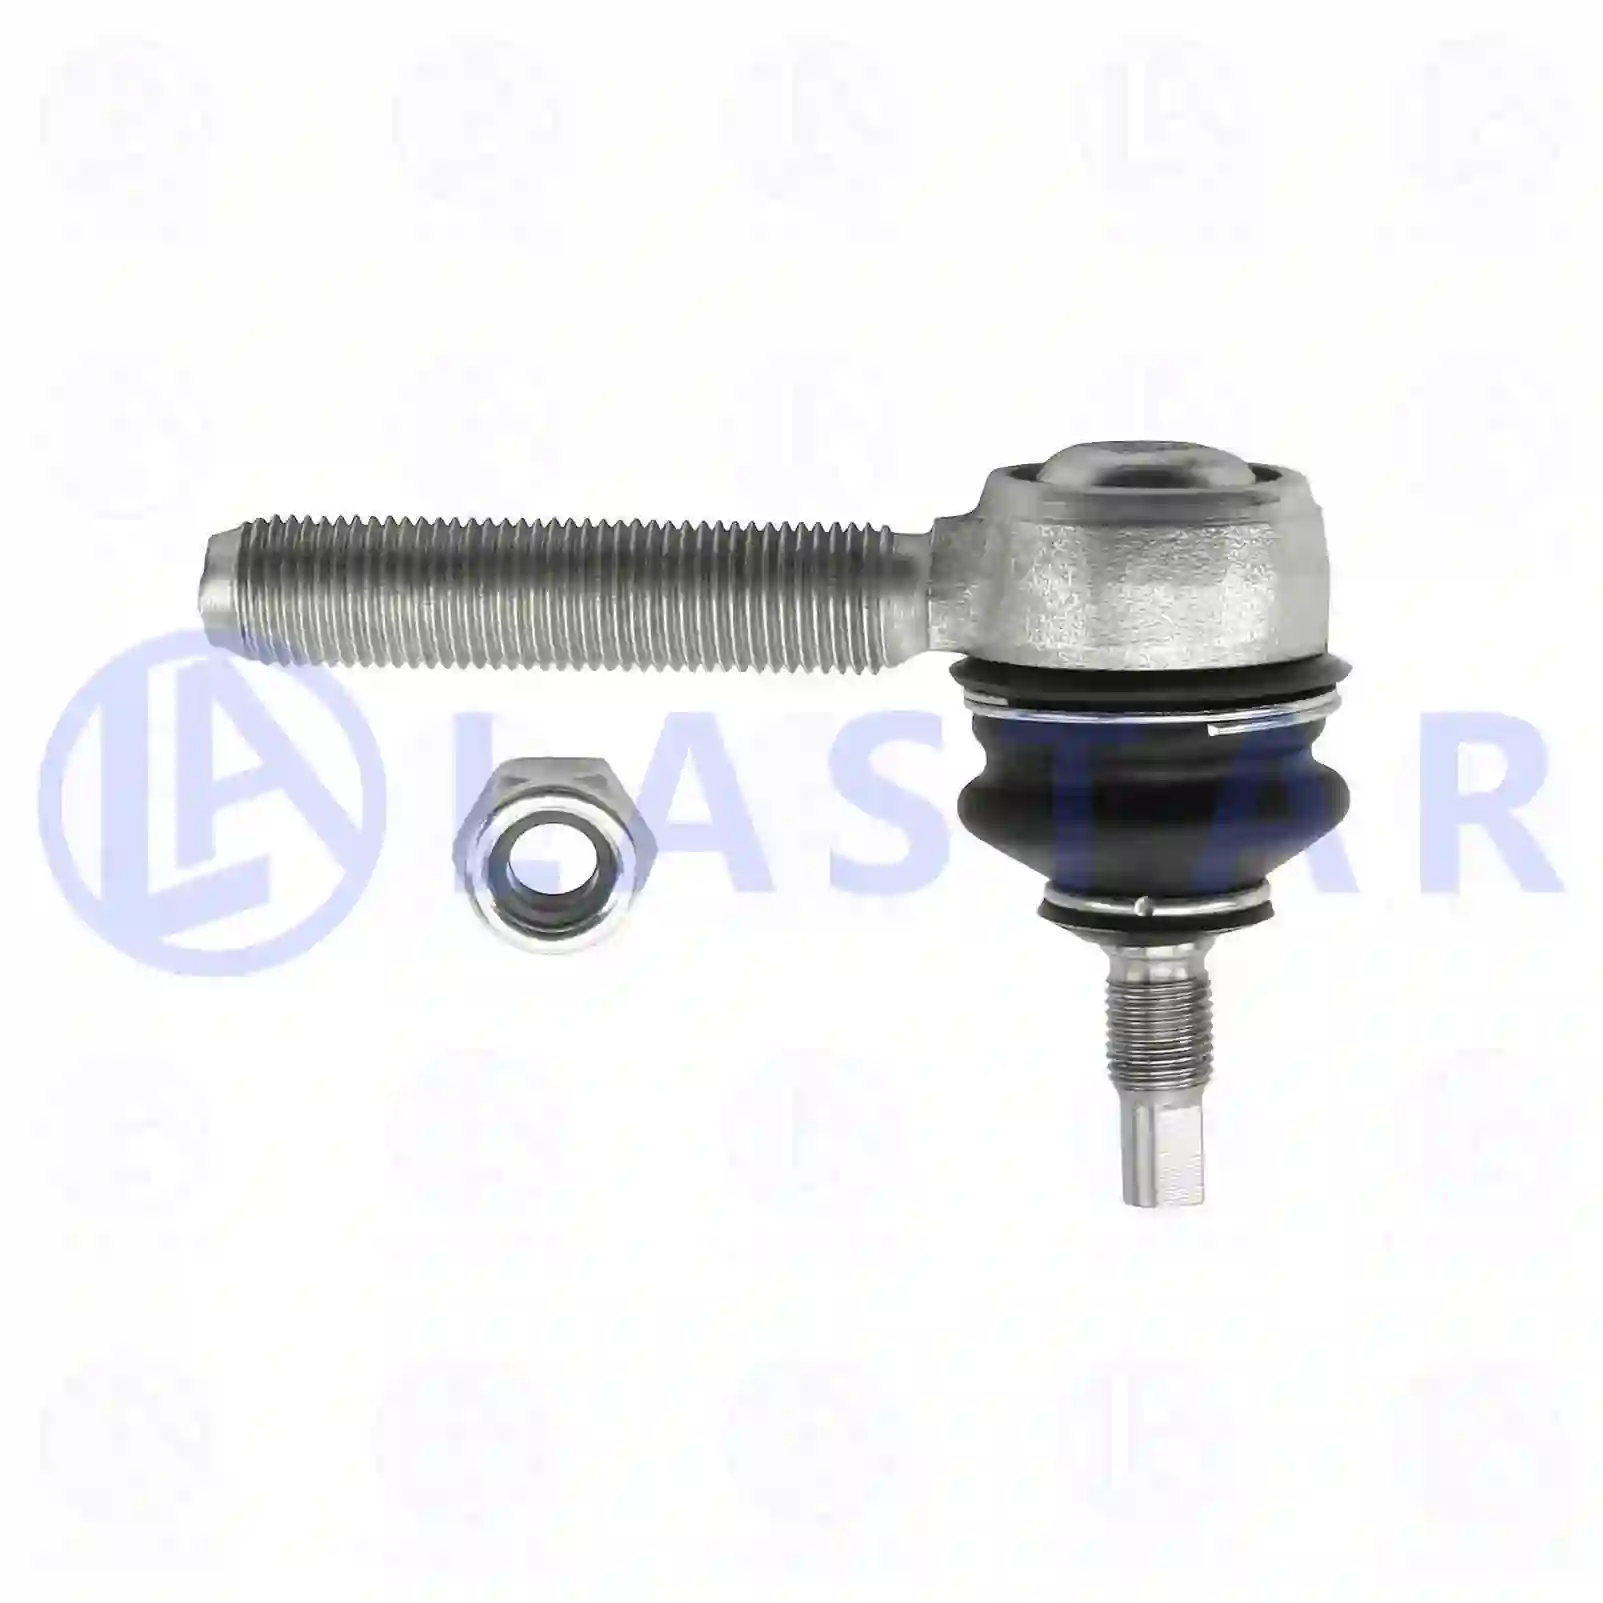 Gear Shift Lever Ball joint, right hand thread, la no: 77731607 ,  oem no:0542477, 1639955, 542477, 91953010045, 0002685289, 1527453 Lastar Spare Part | Truck Spare Parts, Auotomotive Spare Parts